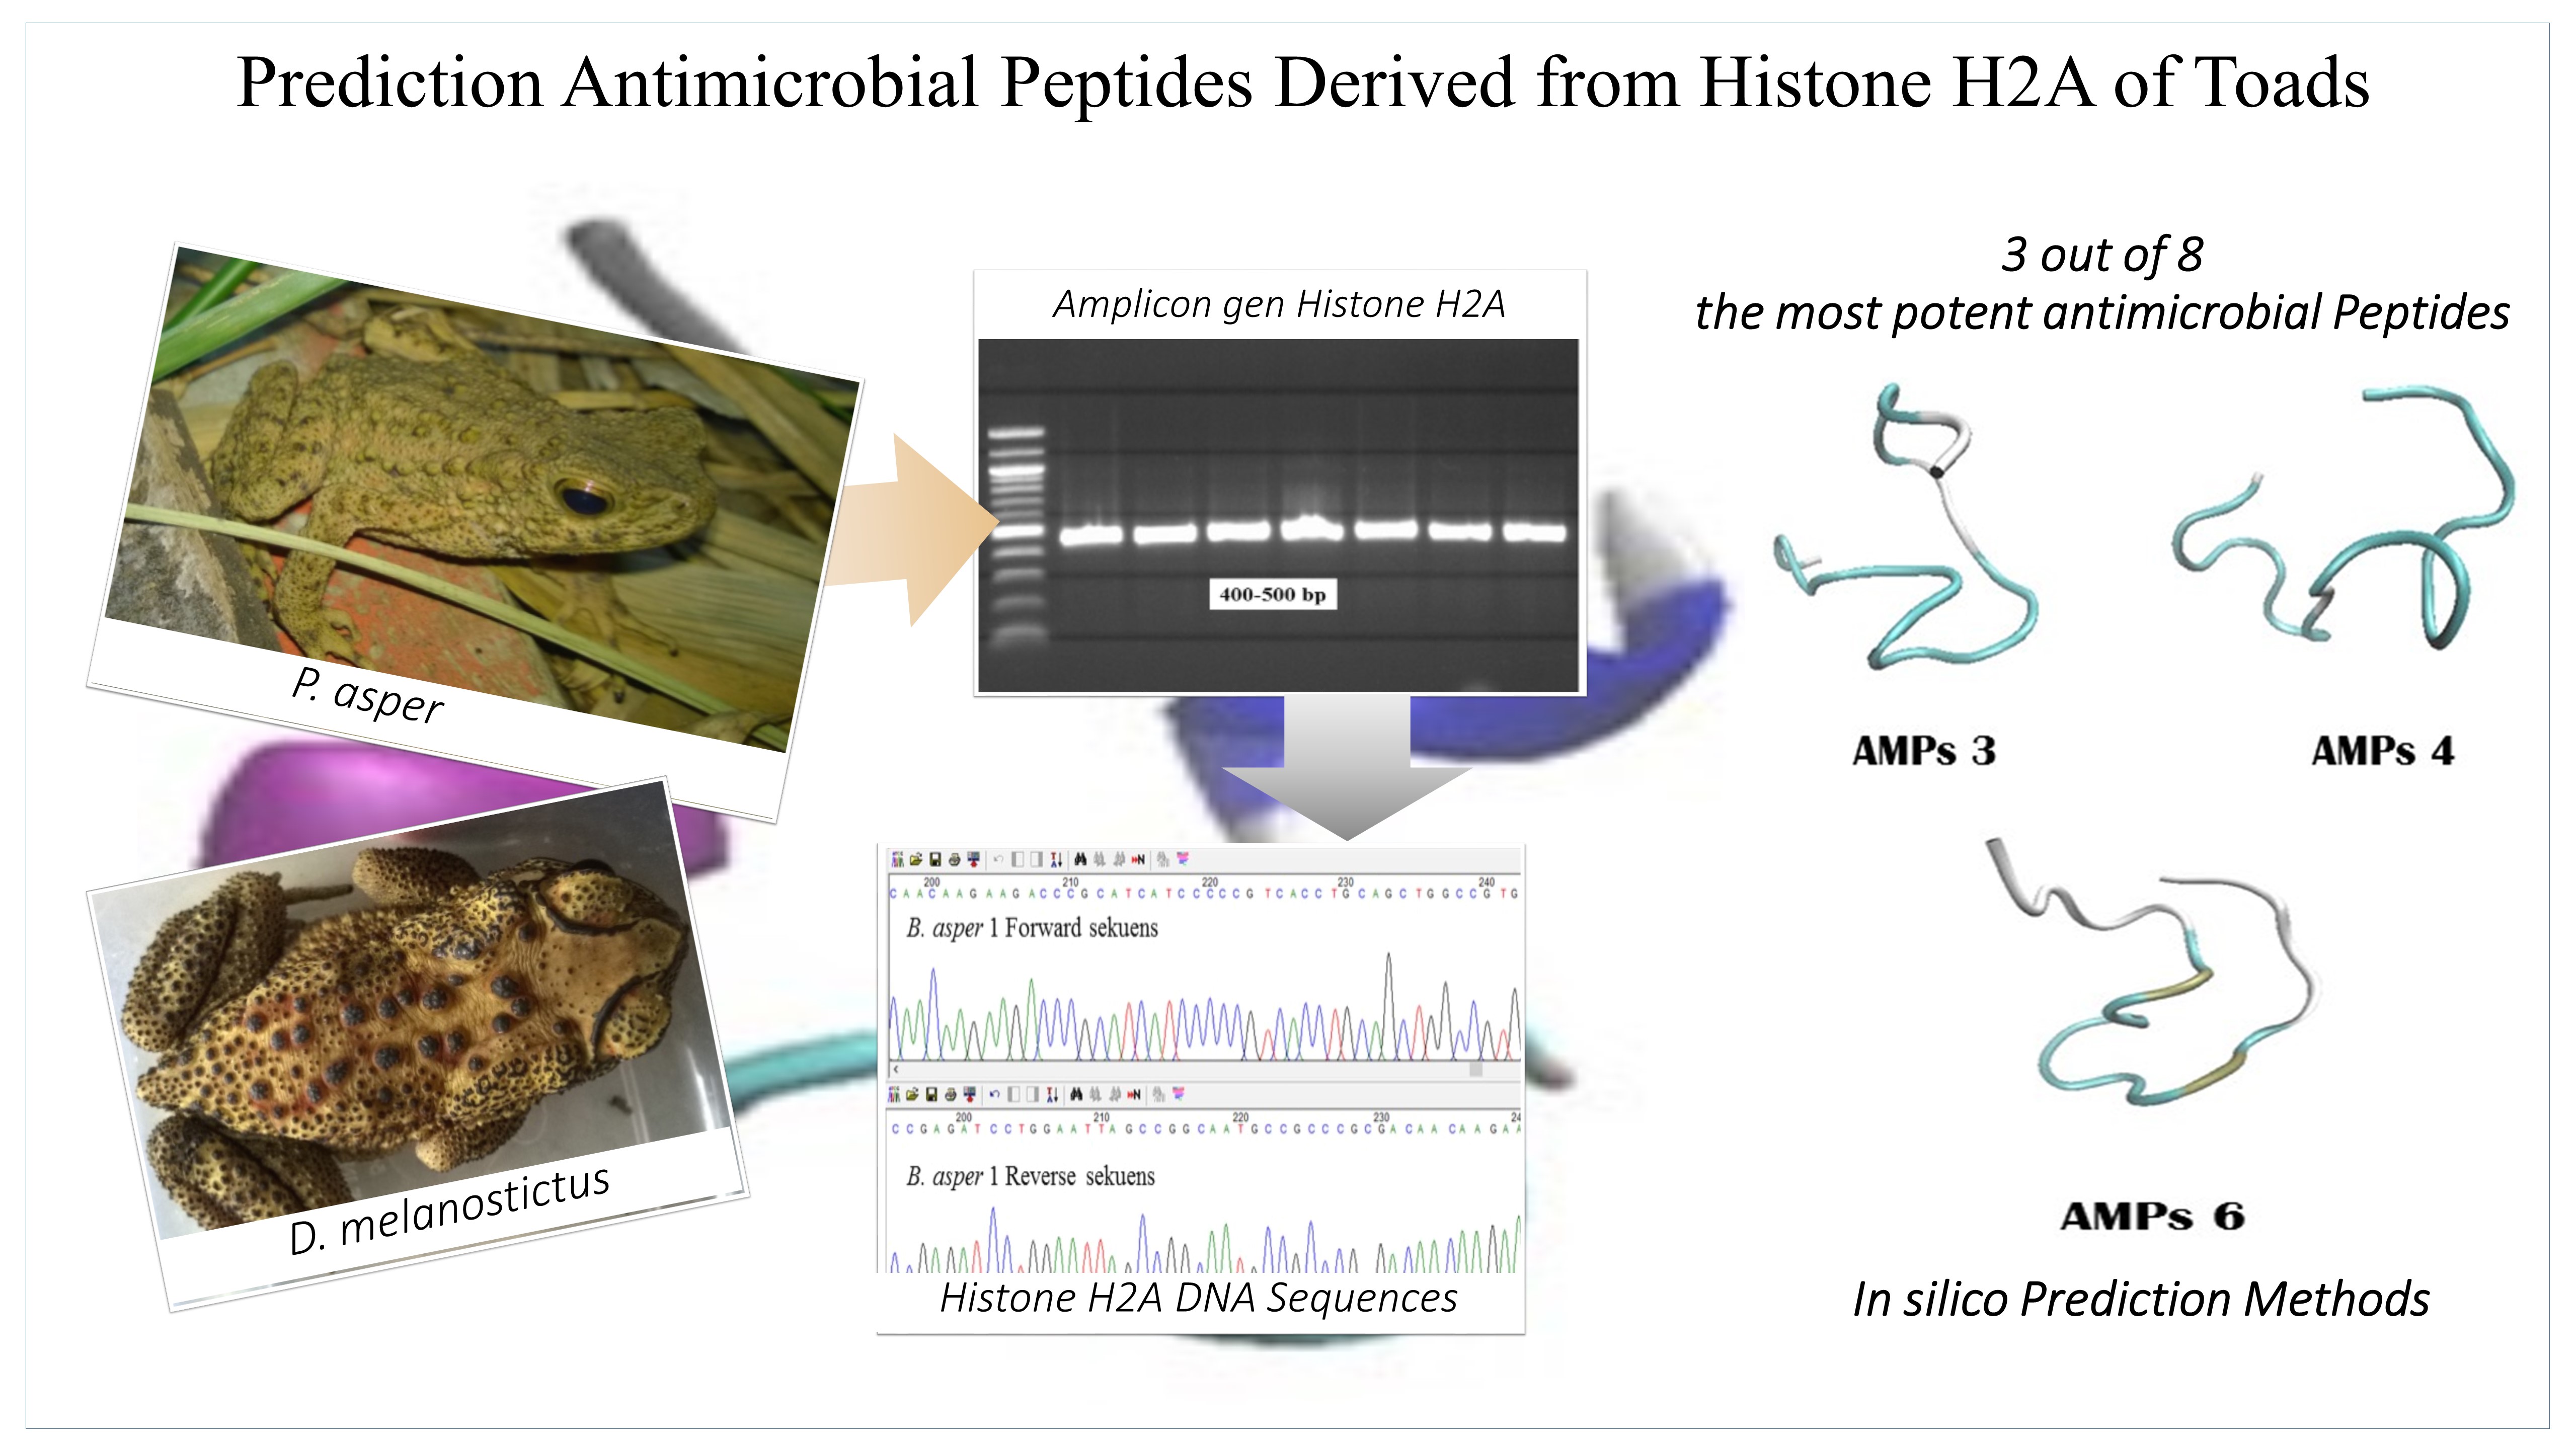 Prediction Antimicrobial Peptides Derived from Histone H2A of Toads